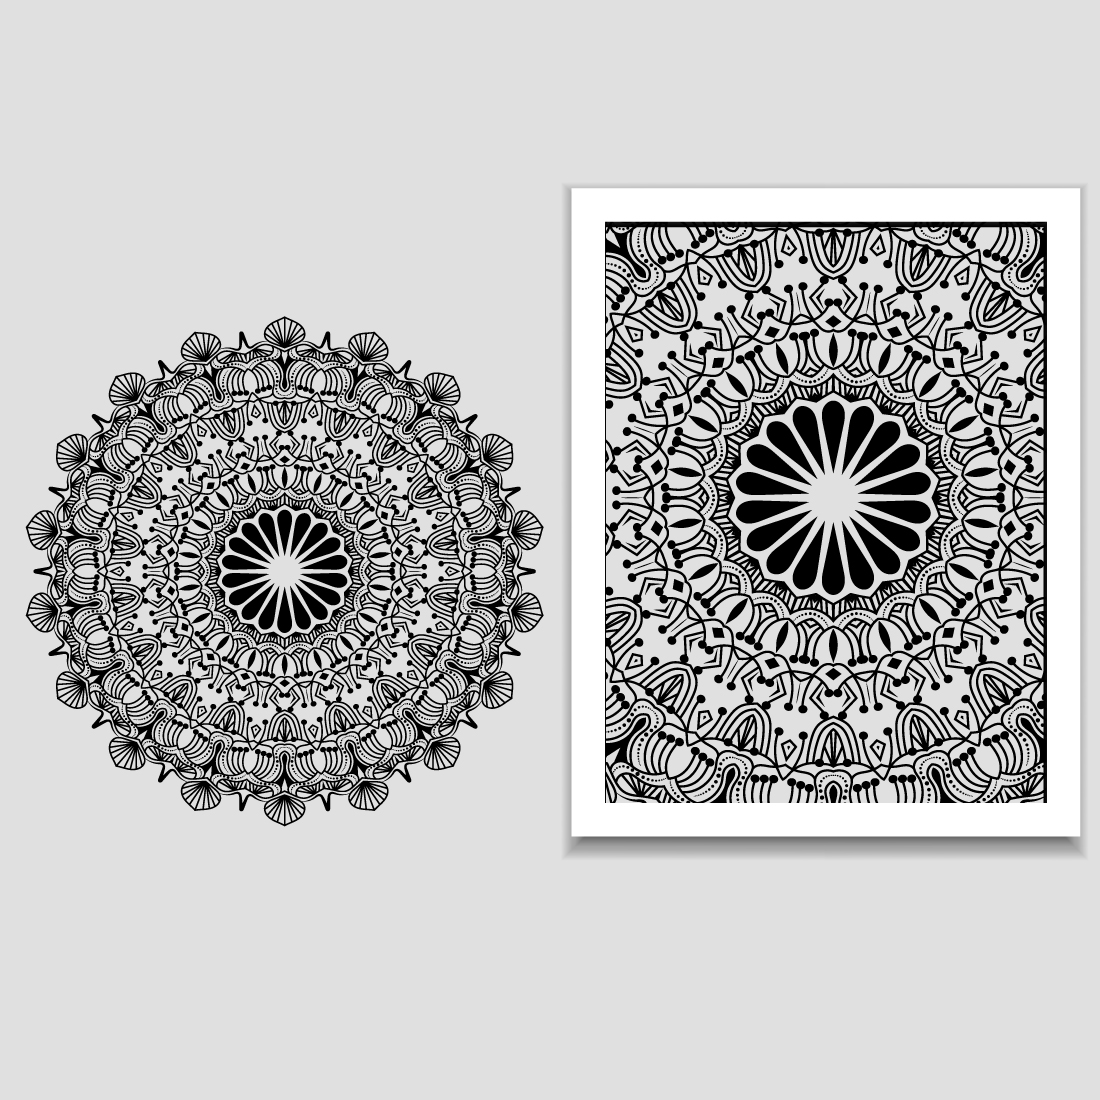 Black and white drawing of a circular design.